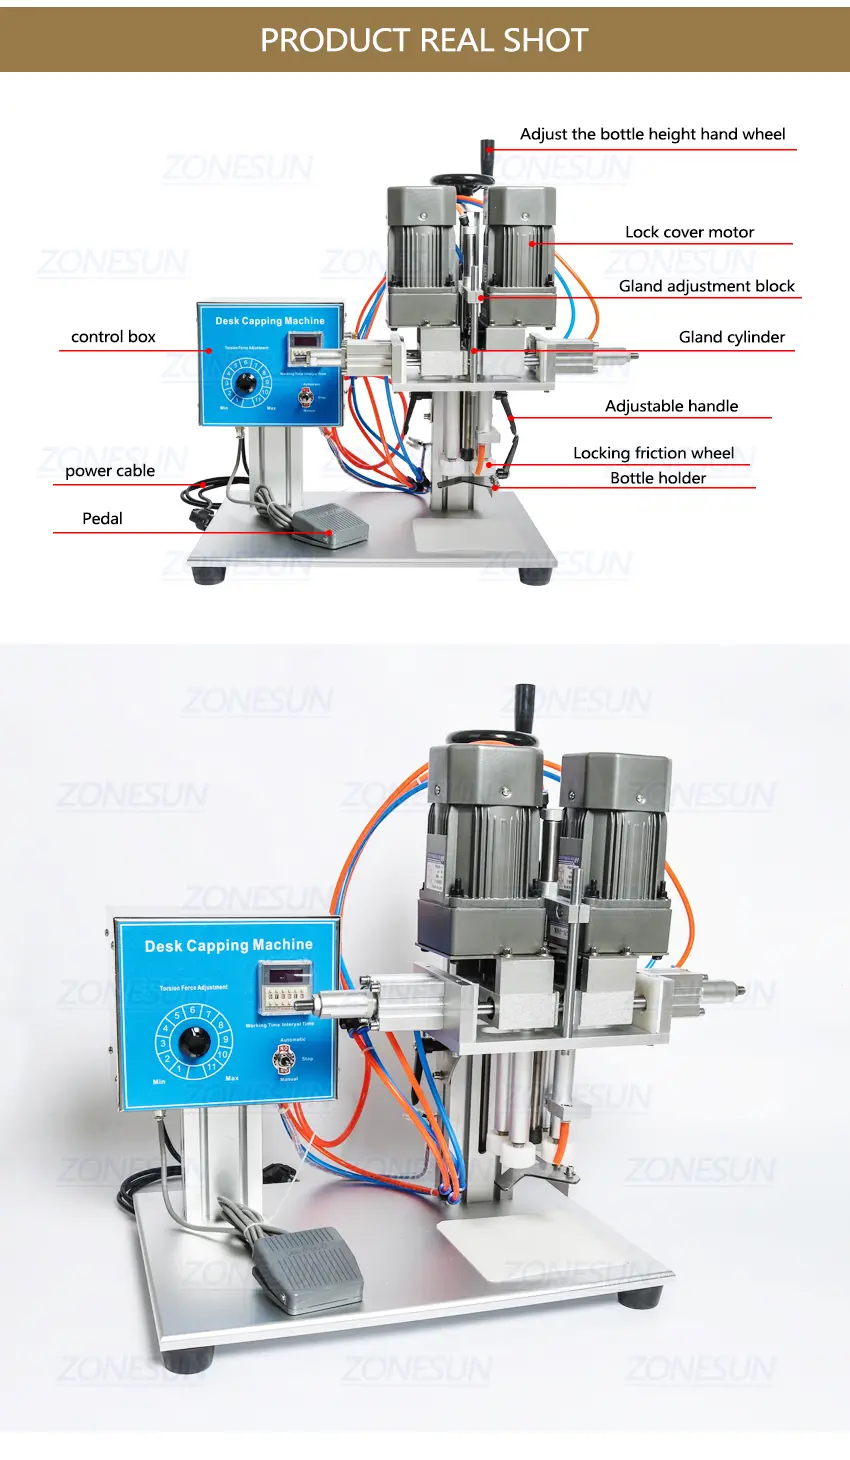 Diagram of semi automatic bottle capping machine